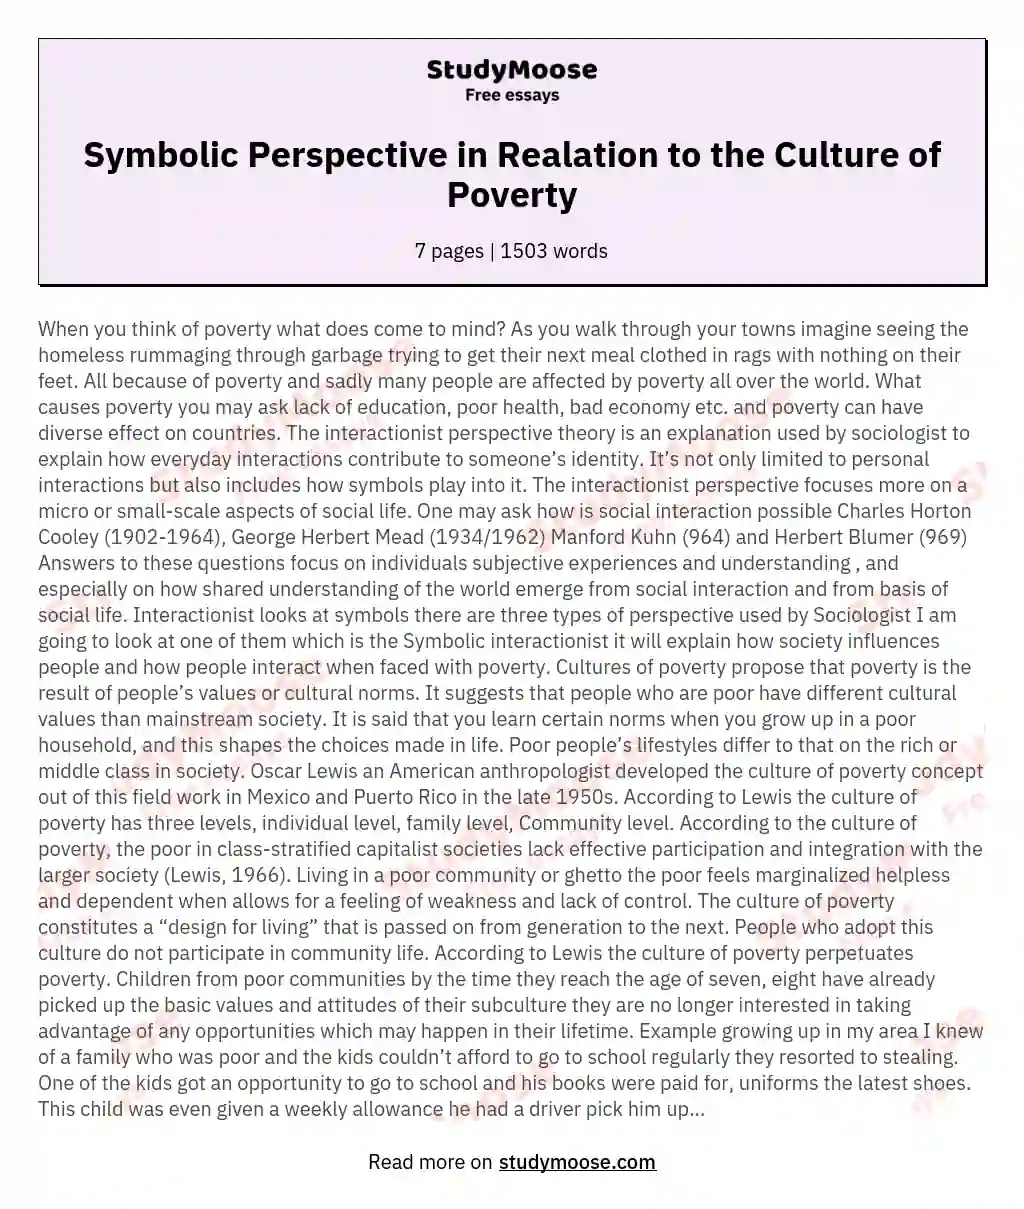 Symbolic Perspective in Realation to the Culture of Poverty essay